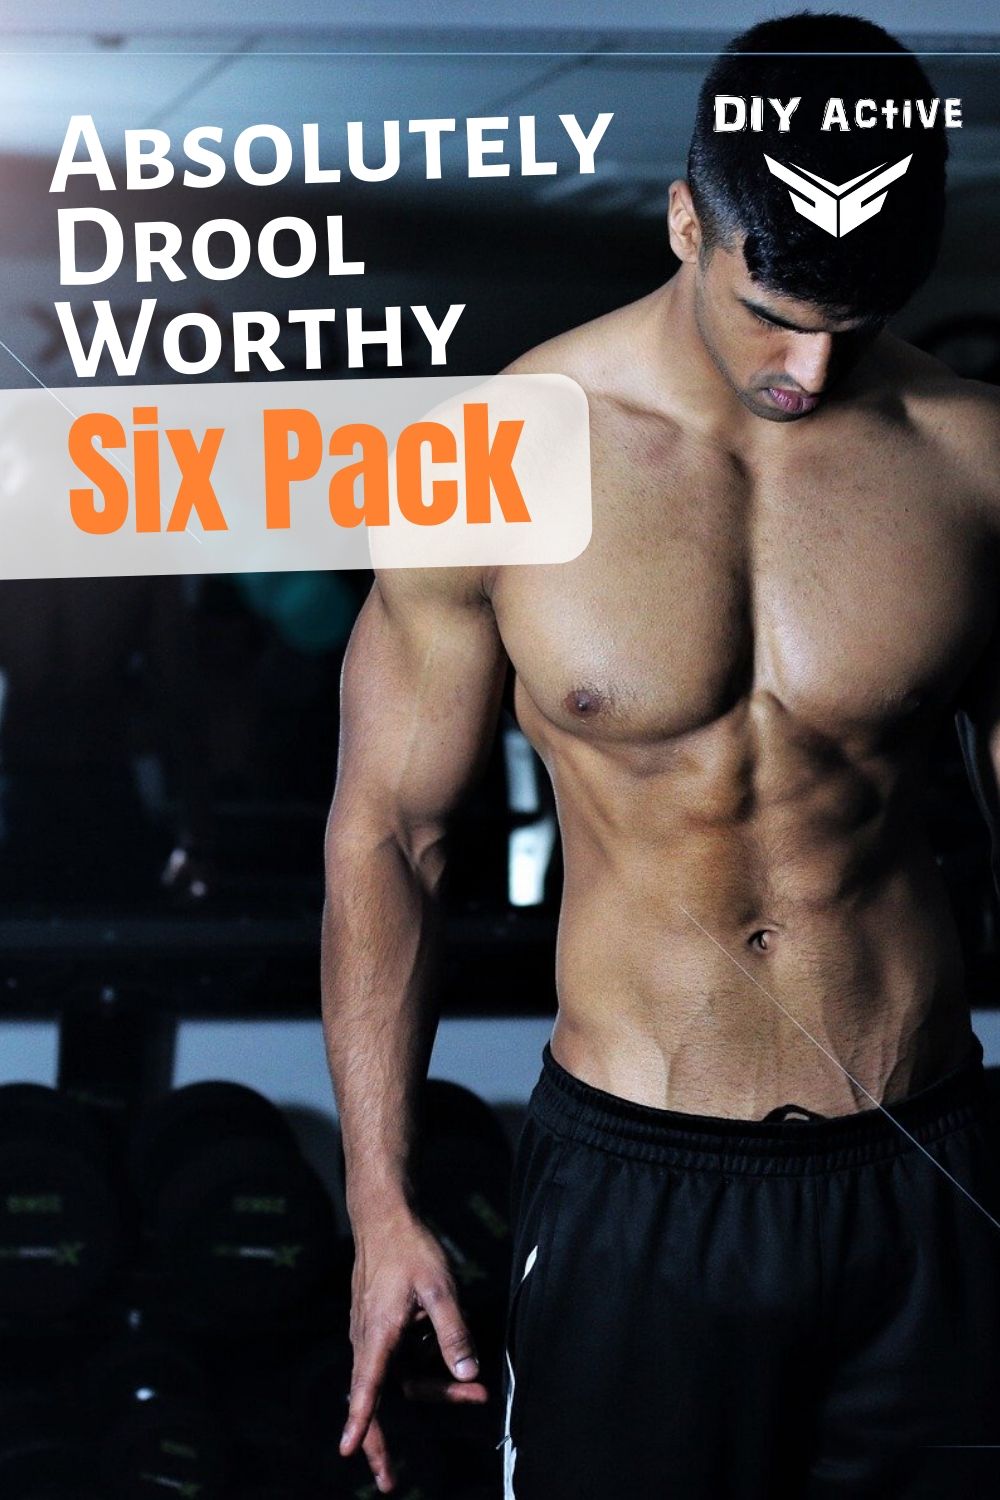 5 Tips for an Absolutely Drool-Worthy Six Pack